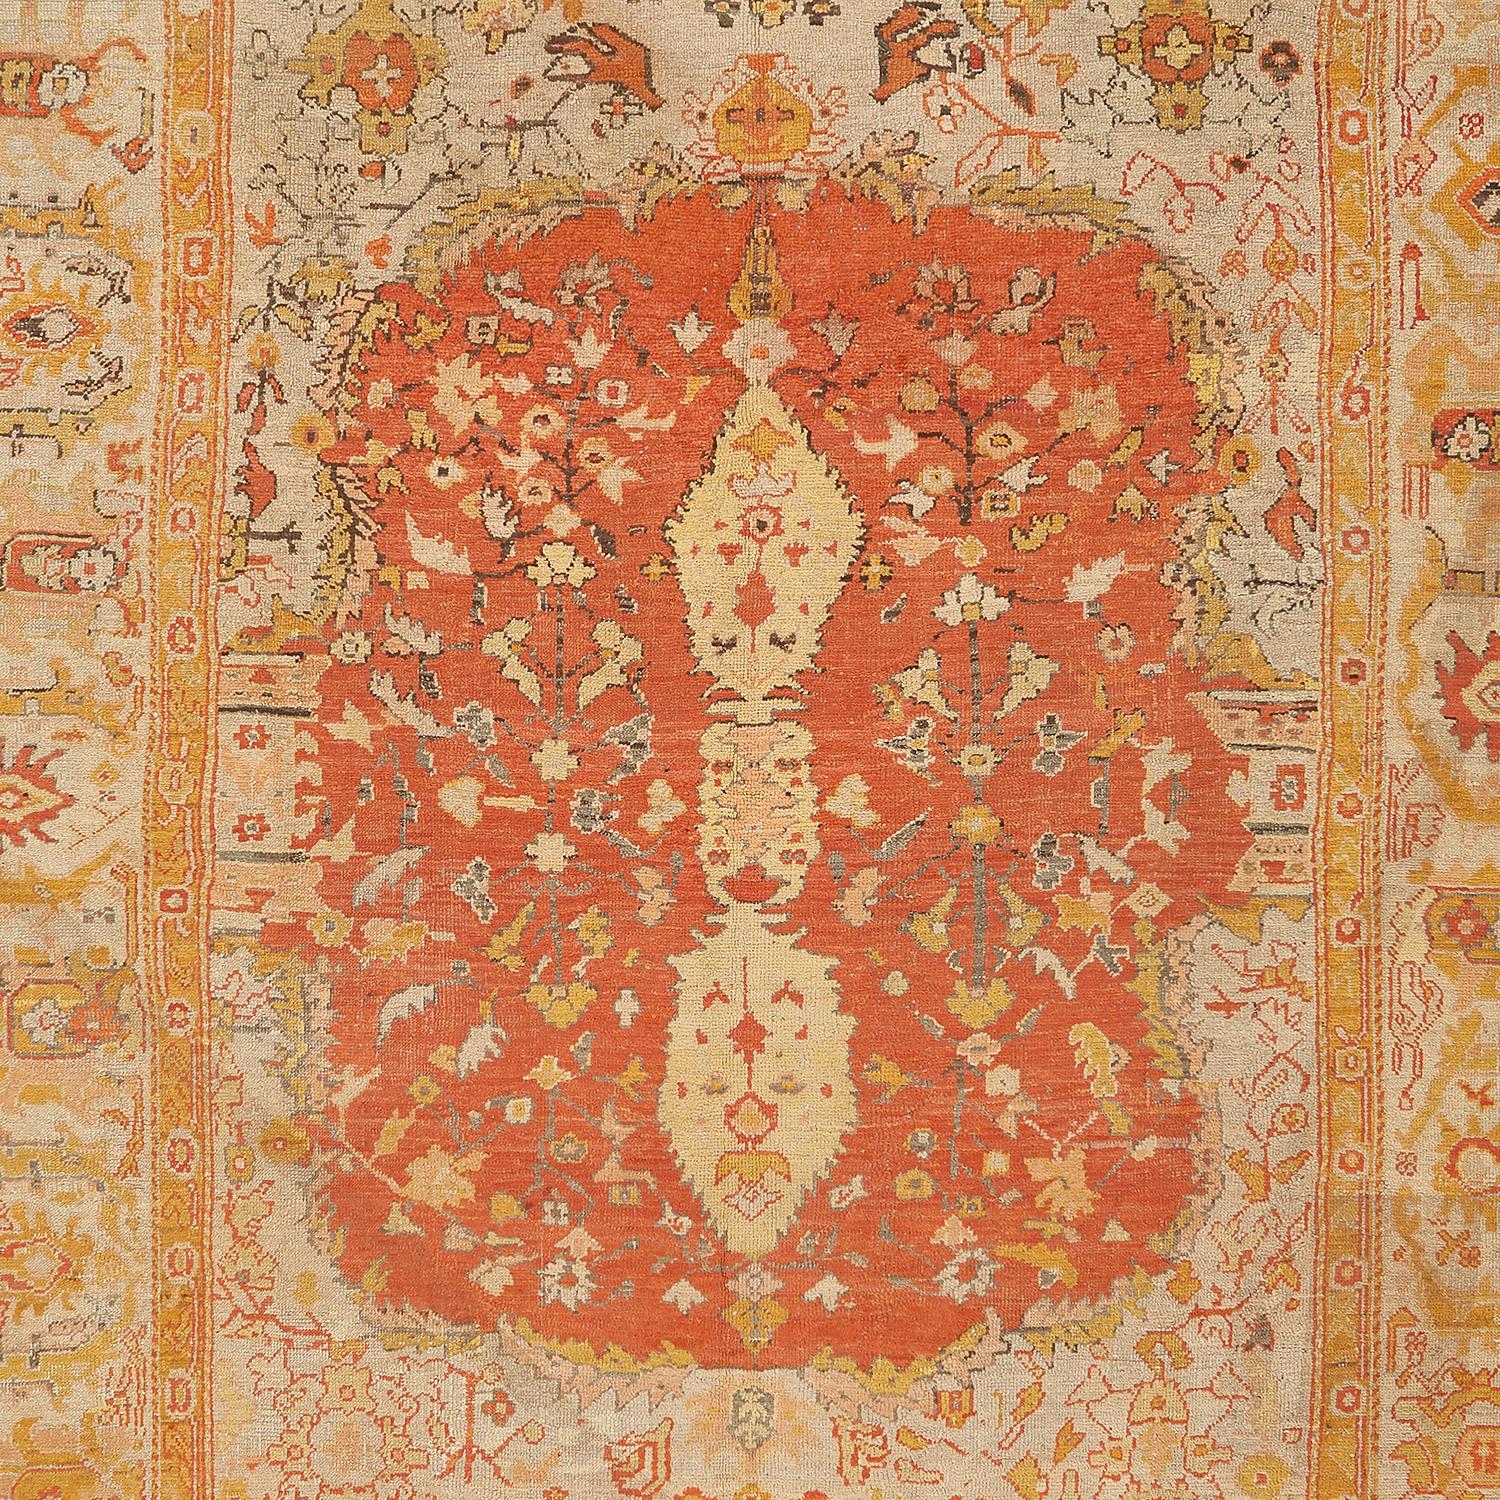 An exemplary of traditional design and craft, this wool rug brings texture and richness to modern spaces.